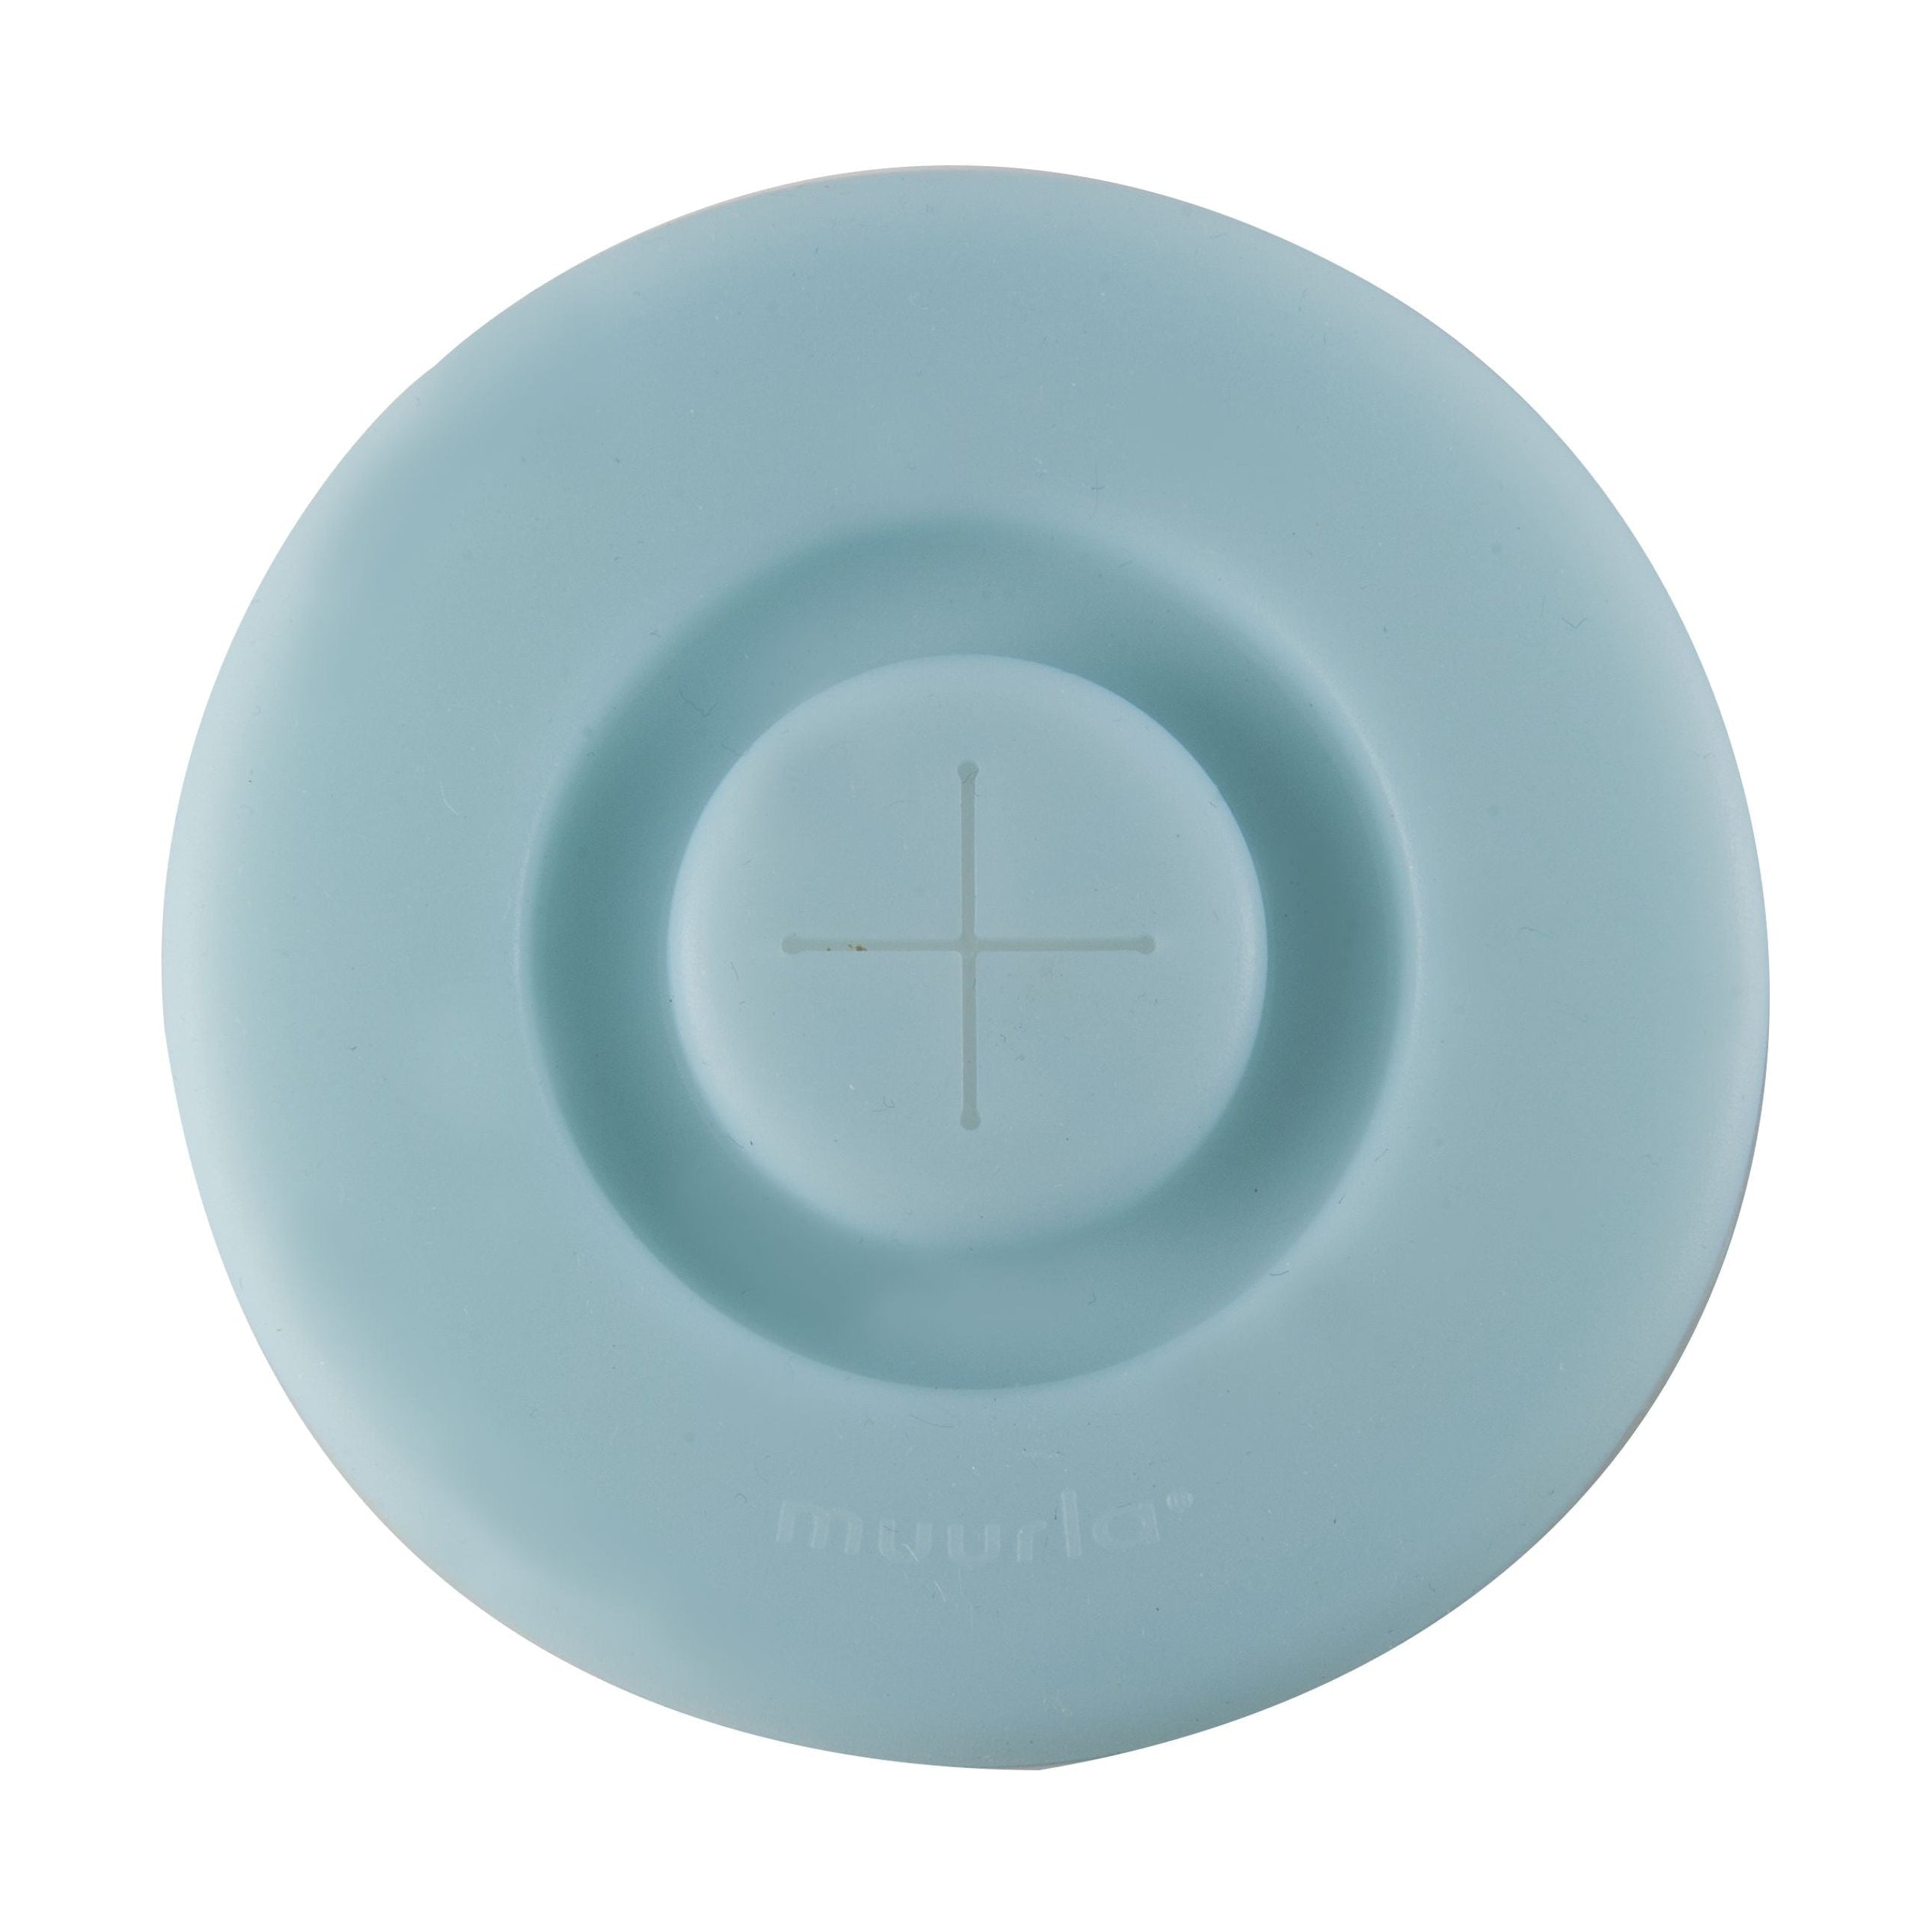 Muurla Silicone Take A Way Silicone Lid With Hole For A Straw, Light Blue